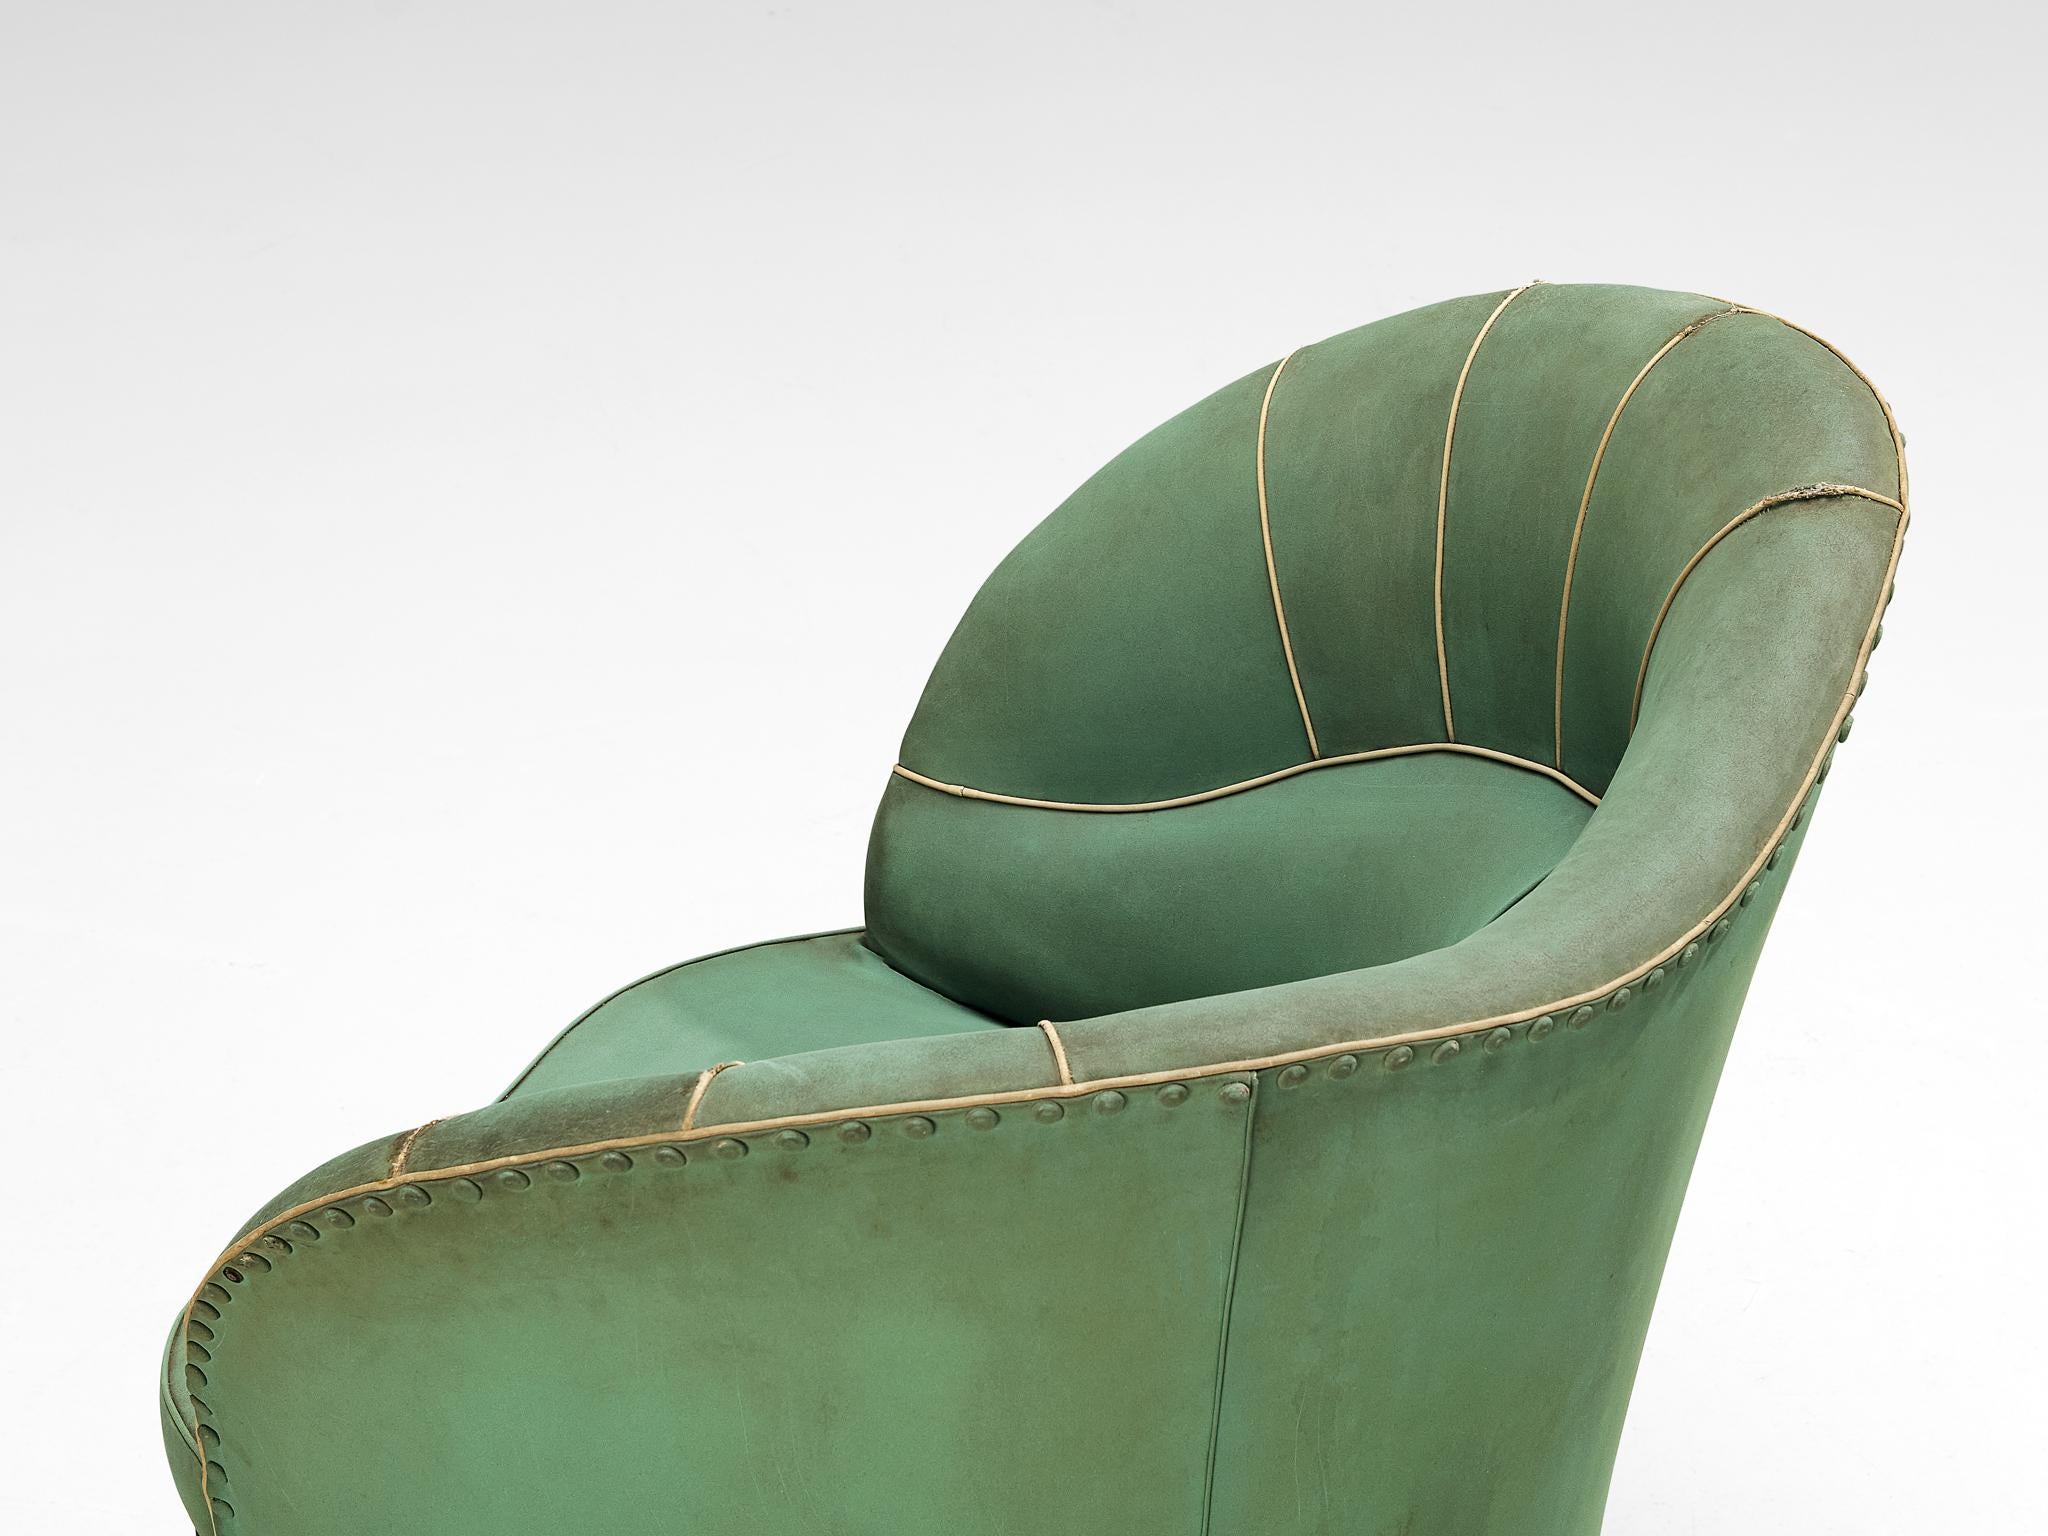 Faux Leather Rare Andrea Busiri Vici Lounge Chair in Jade Green Upholstery 